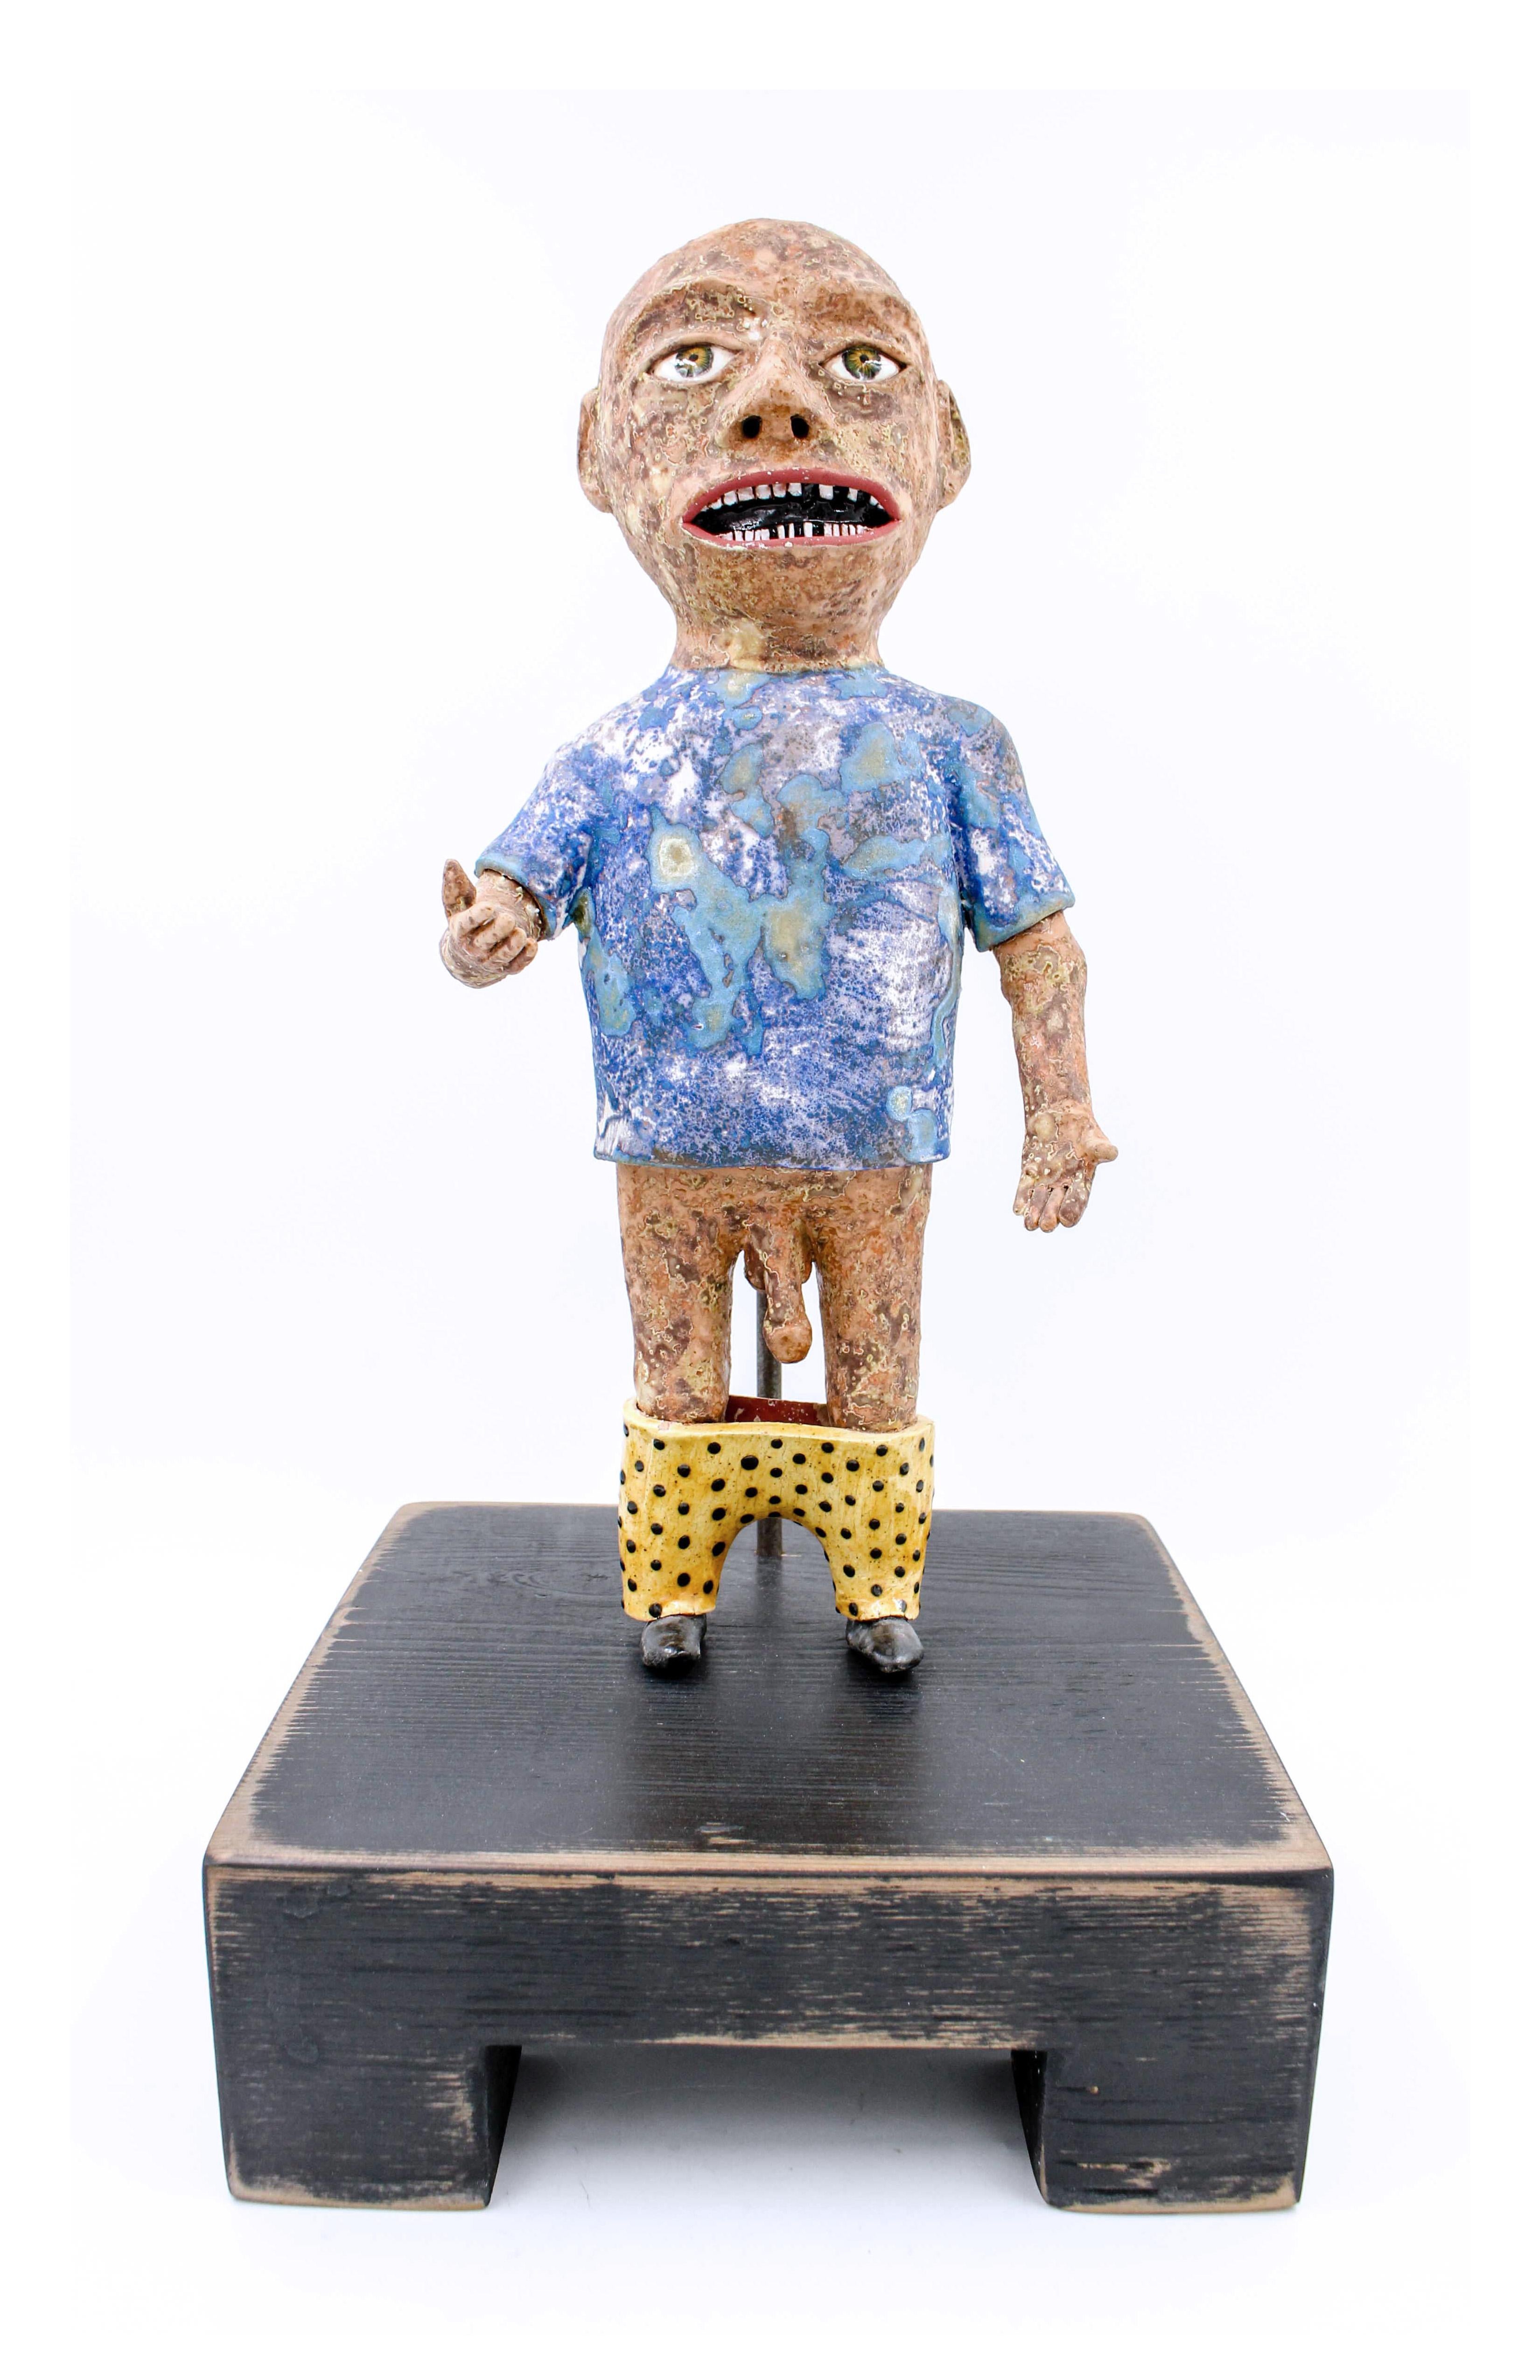 Wesley Anderegg Figurative Sculpture - Caught with Pants Down, 2018, ceramic